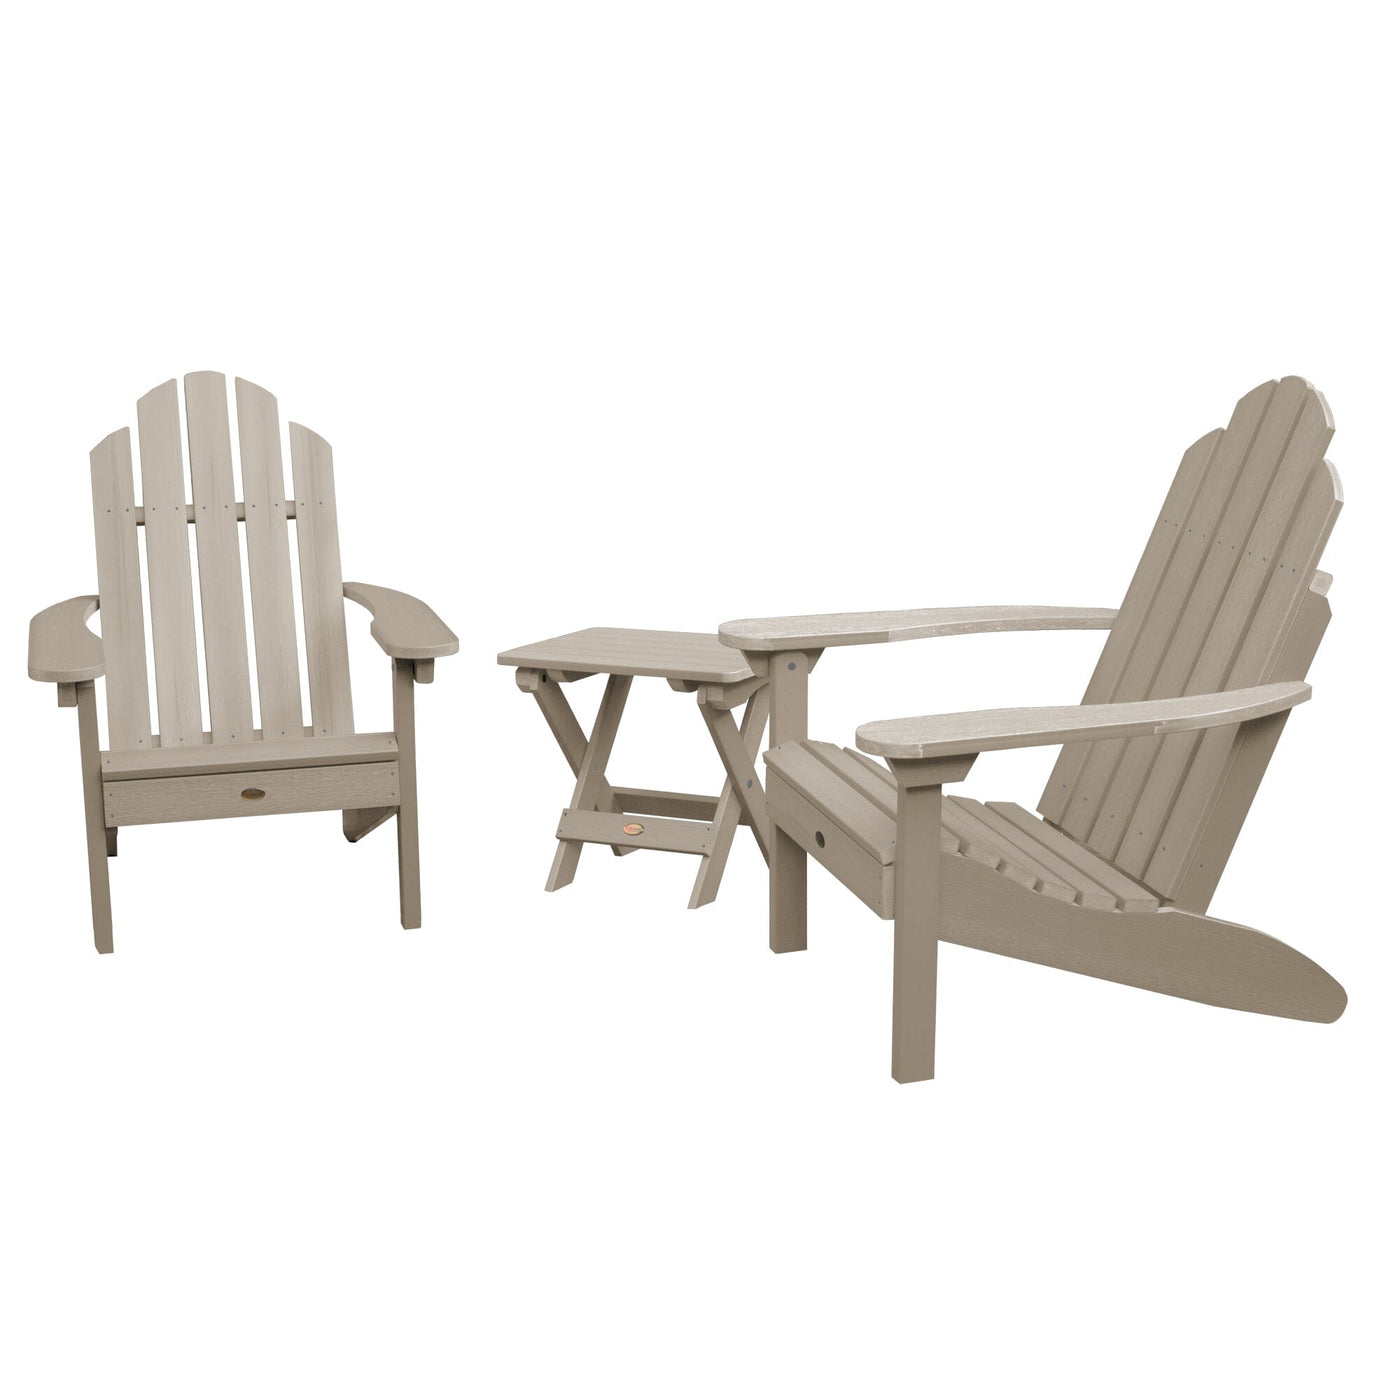 2 Classic Westport Adirondack Chairs with 1 Adirondack Folding Side Table Kitted Sets Highwood USA Woodland Brown 